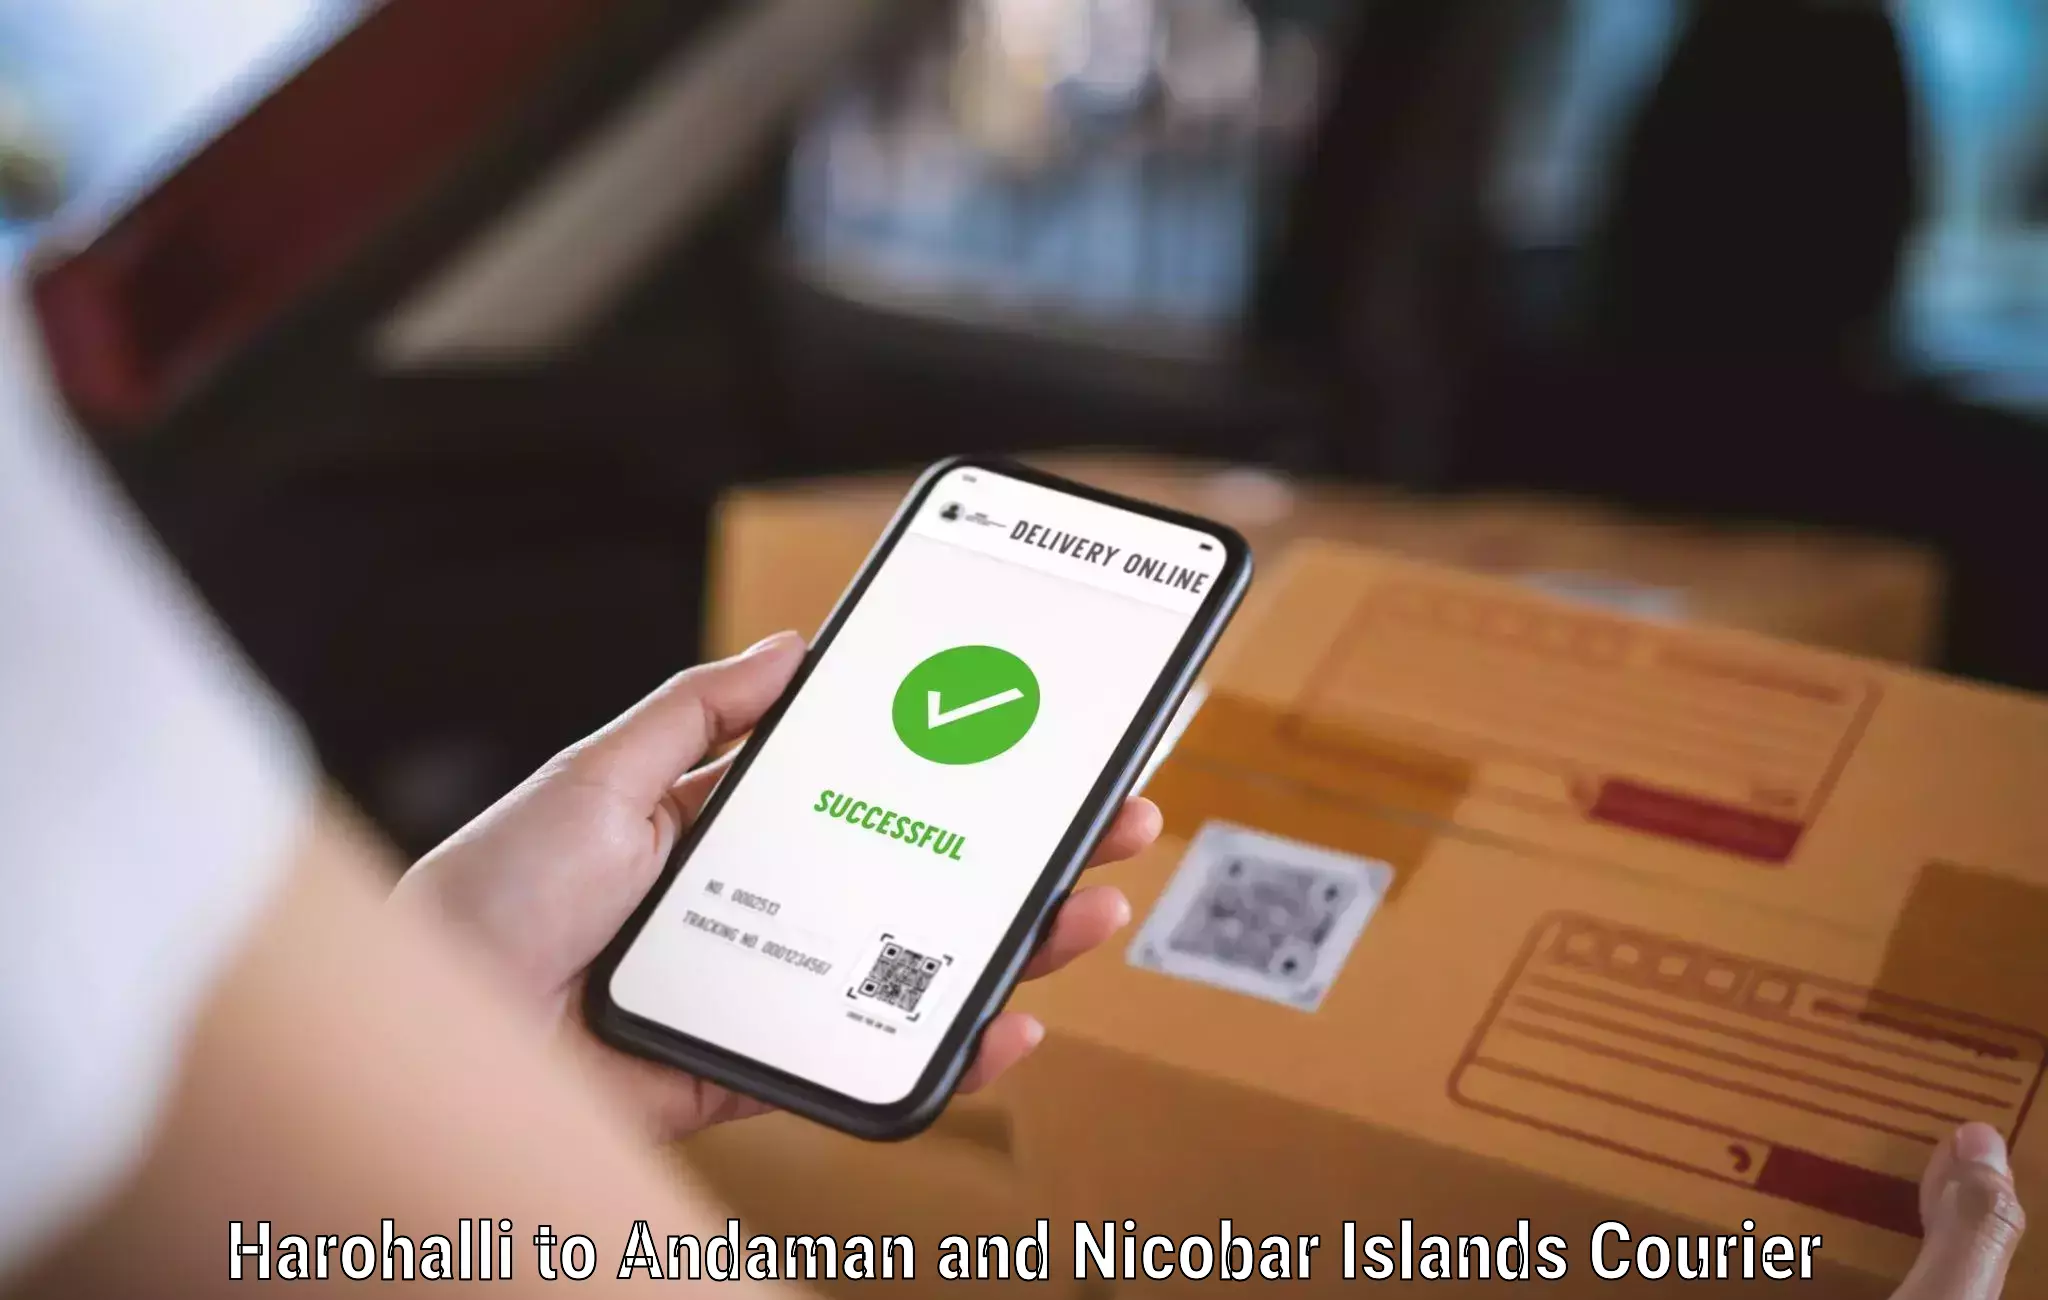 Courier service comparison Harohalli to North And Middle Andaman